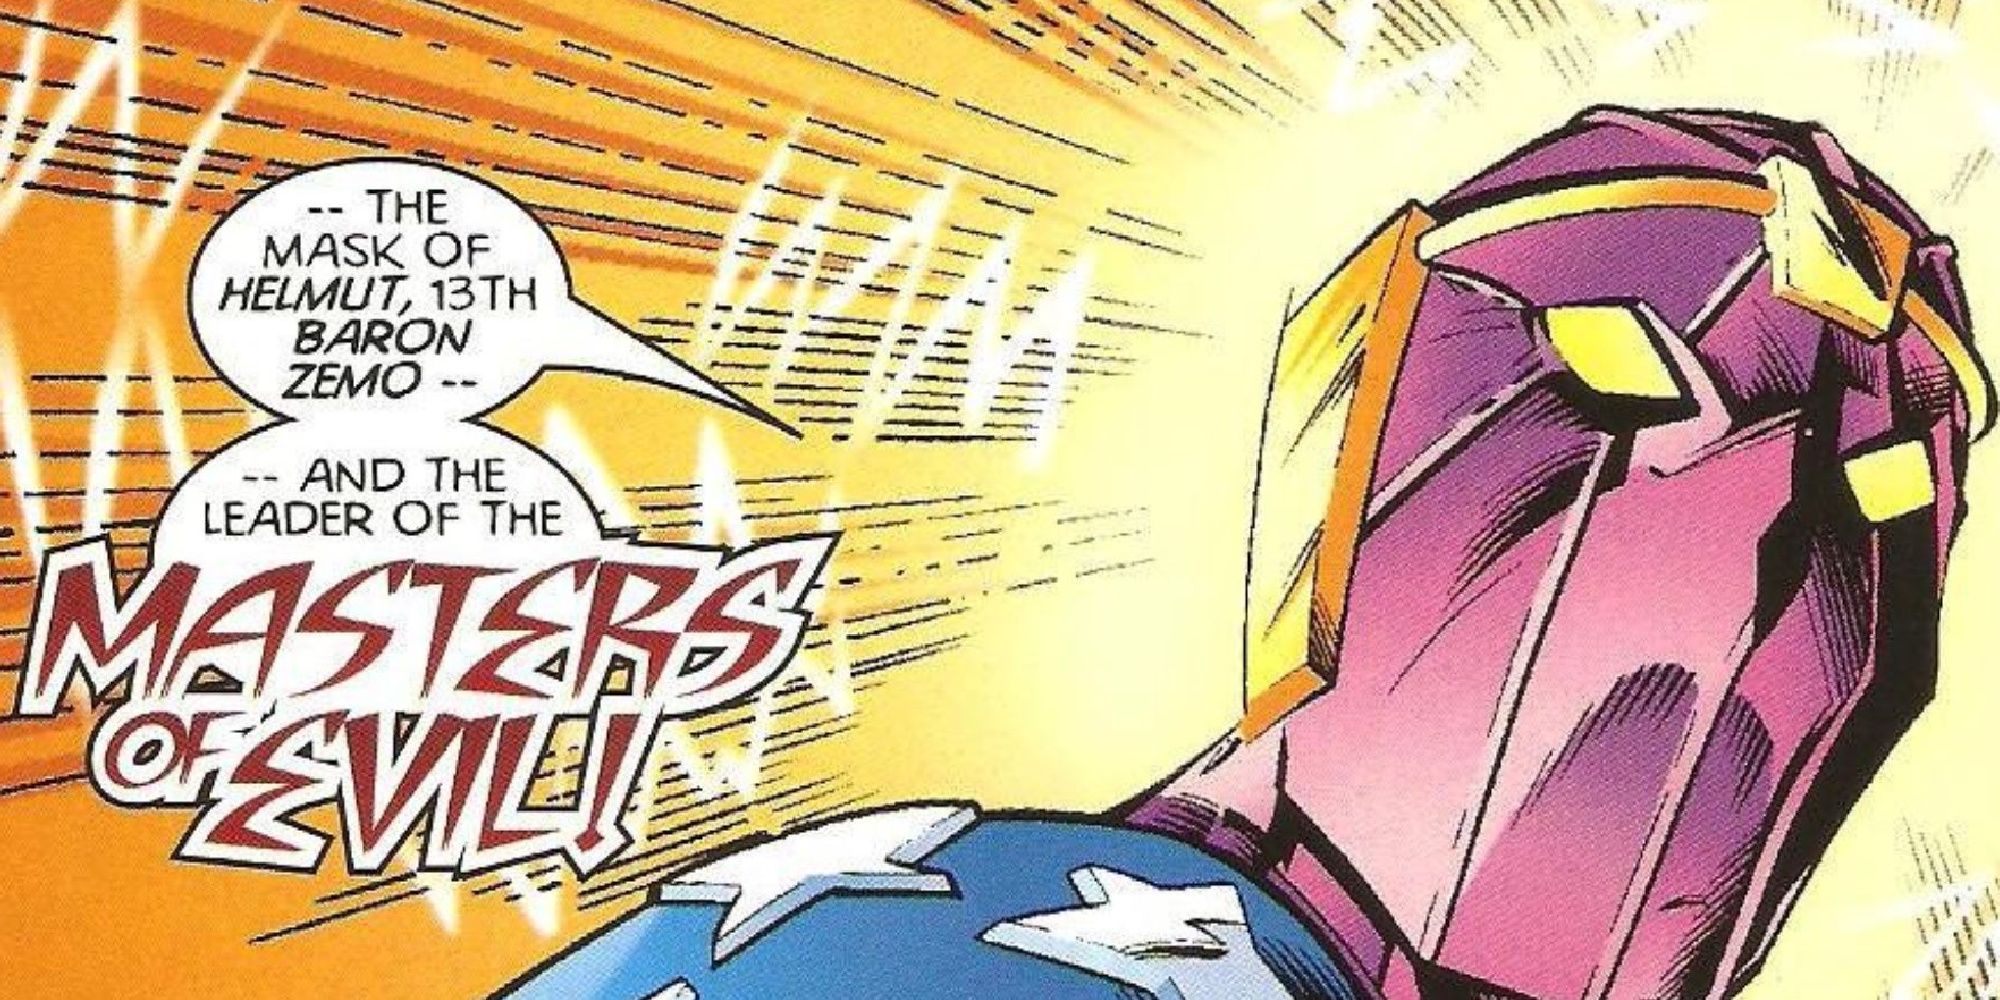 Baron Zemo reveals the truth about the Thunderbolts in Marvel Comics.